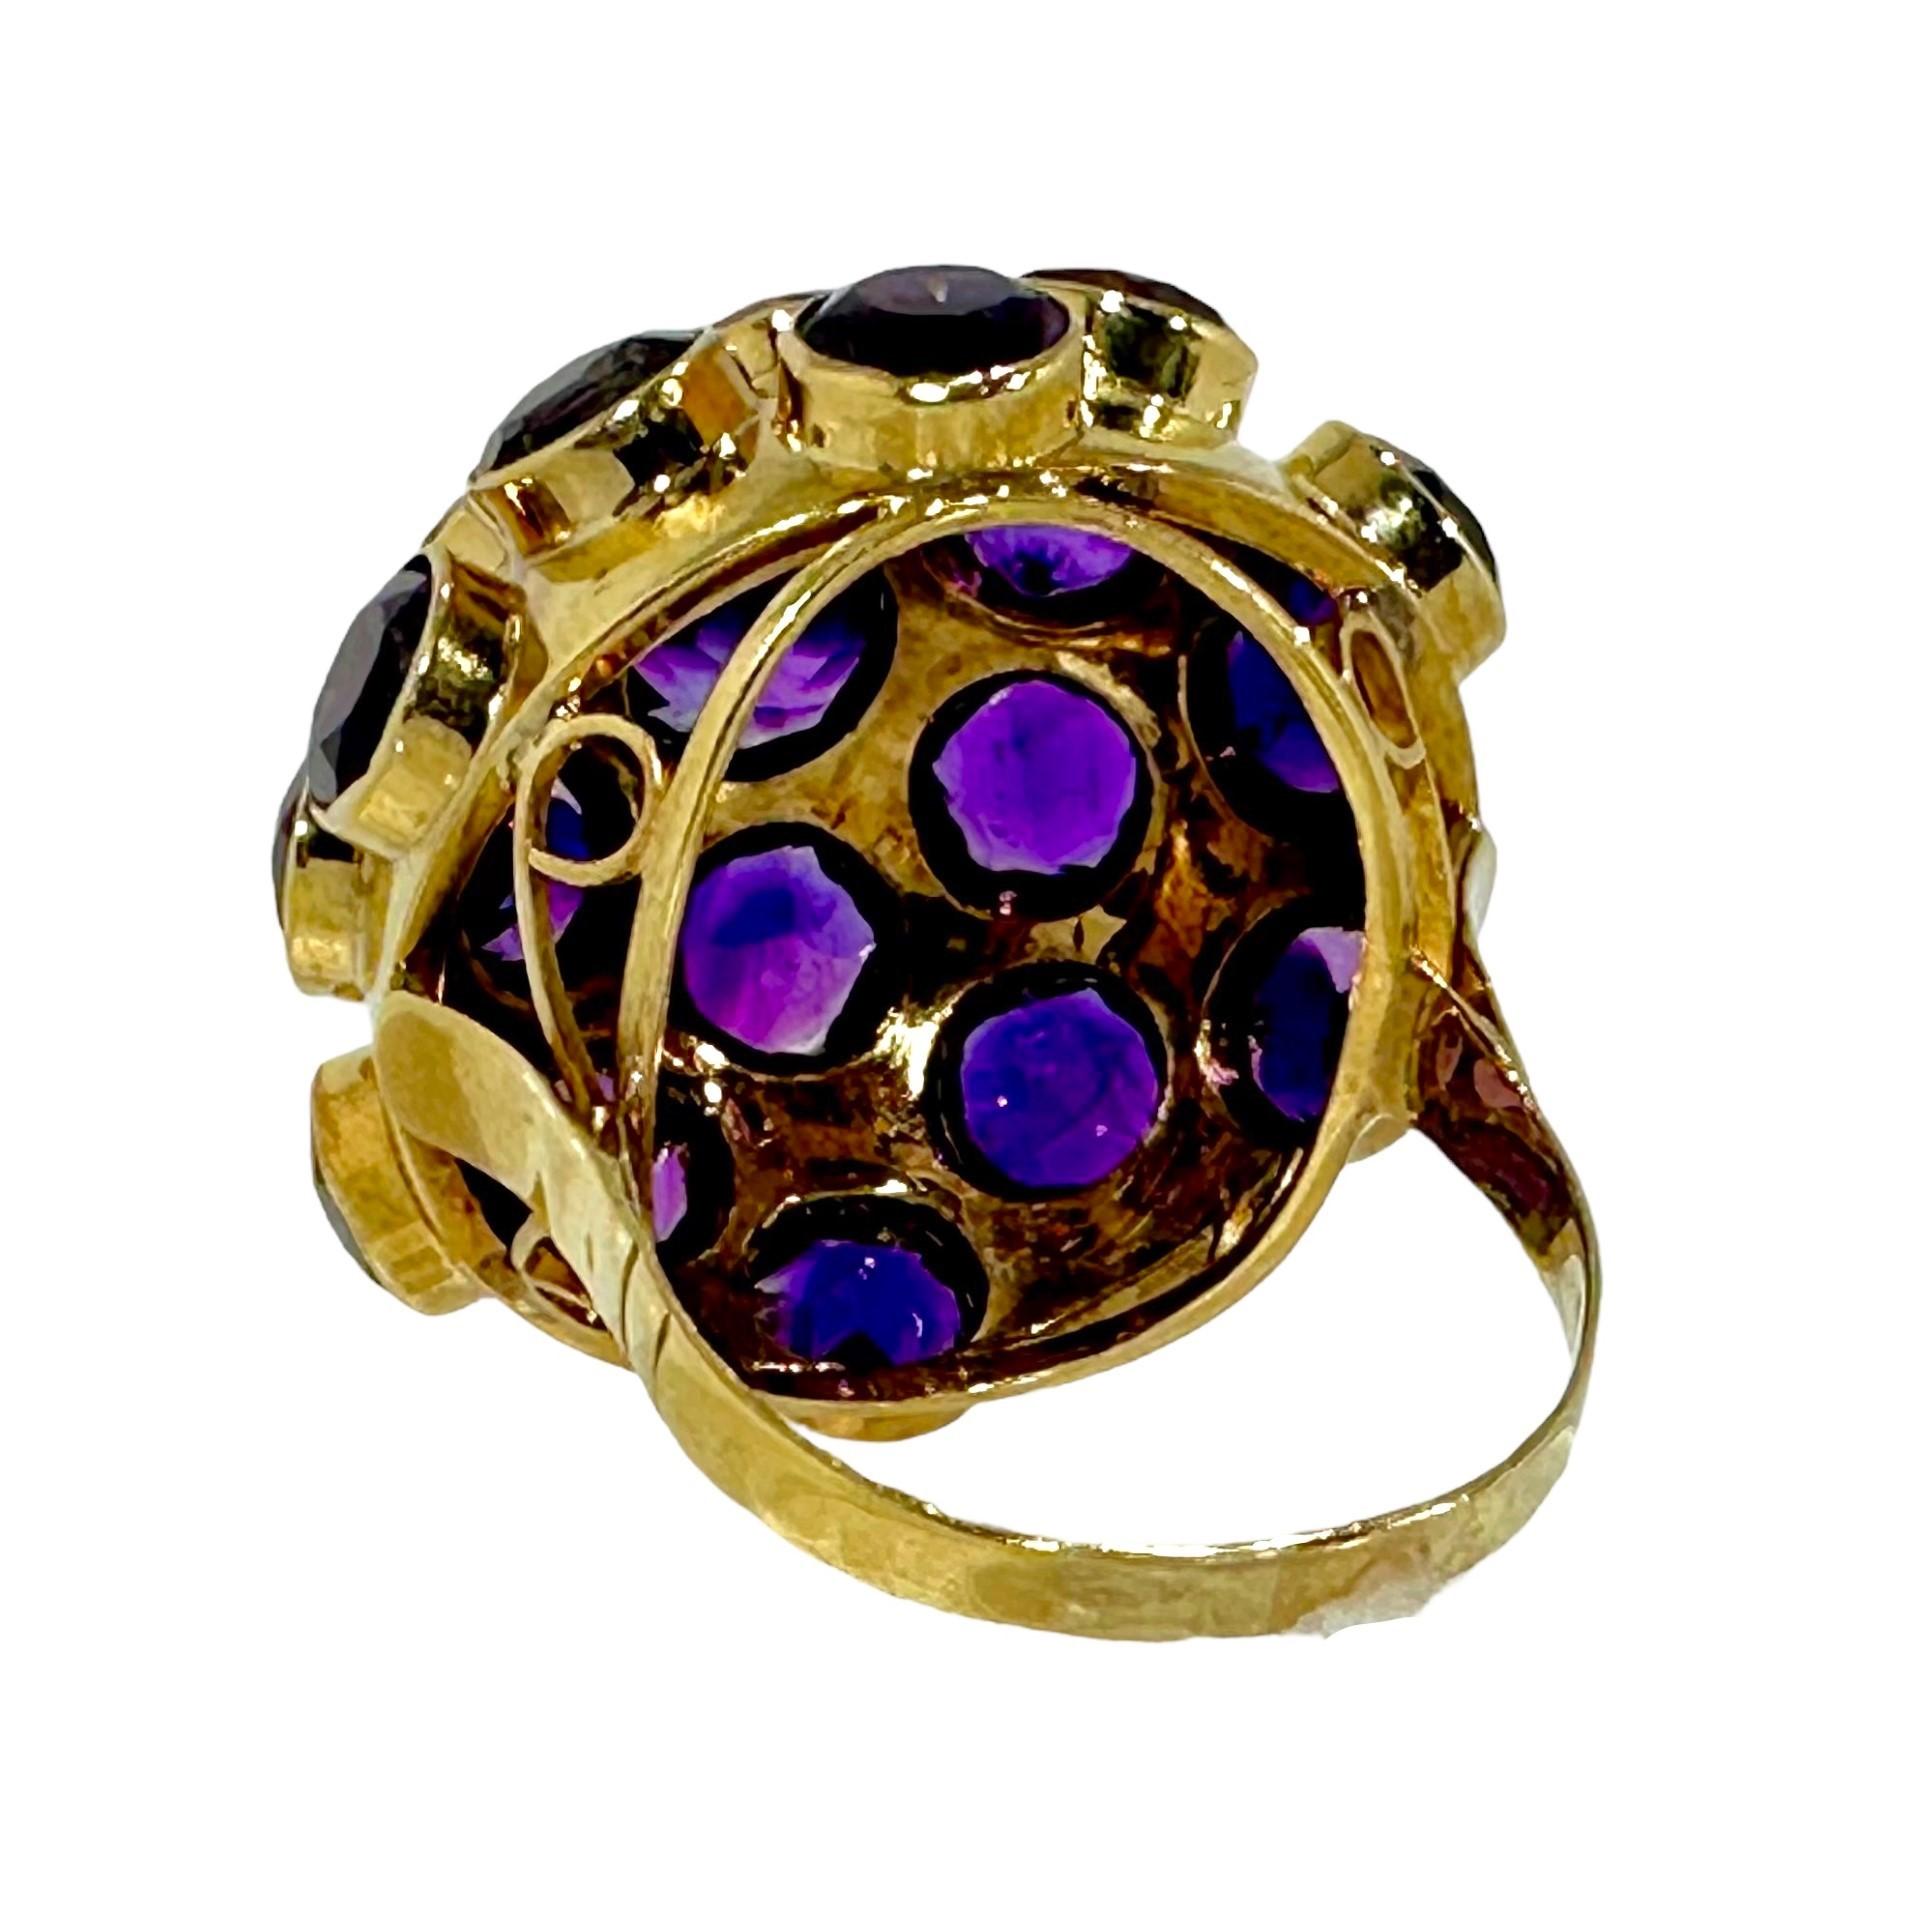 Mid-20th Century 18k Yellow Gold and All Amethyst Large Sputnik Dome Ring   In Good Condition For Sale In Palm Beach, FL